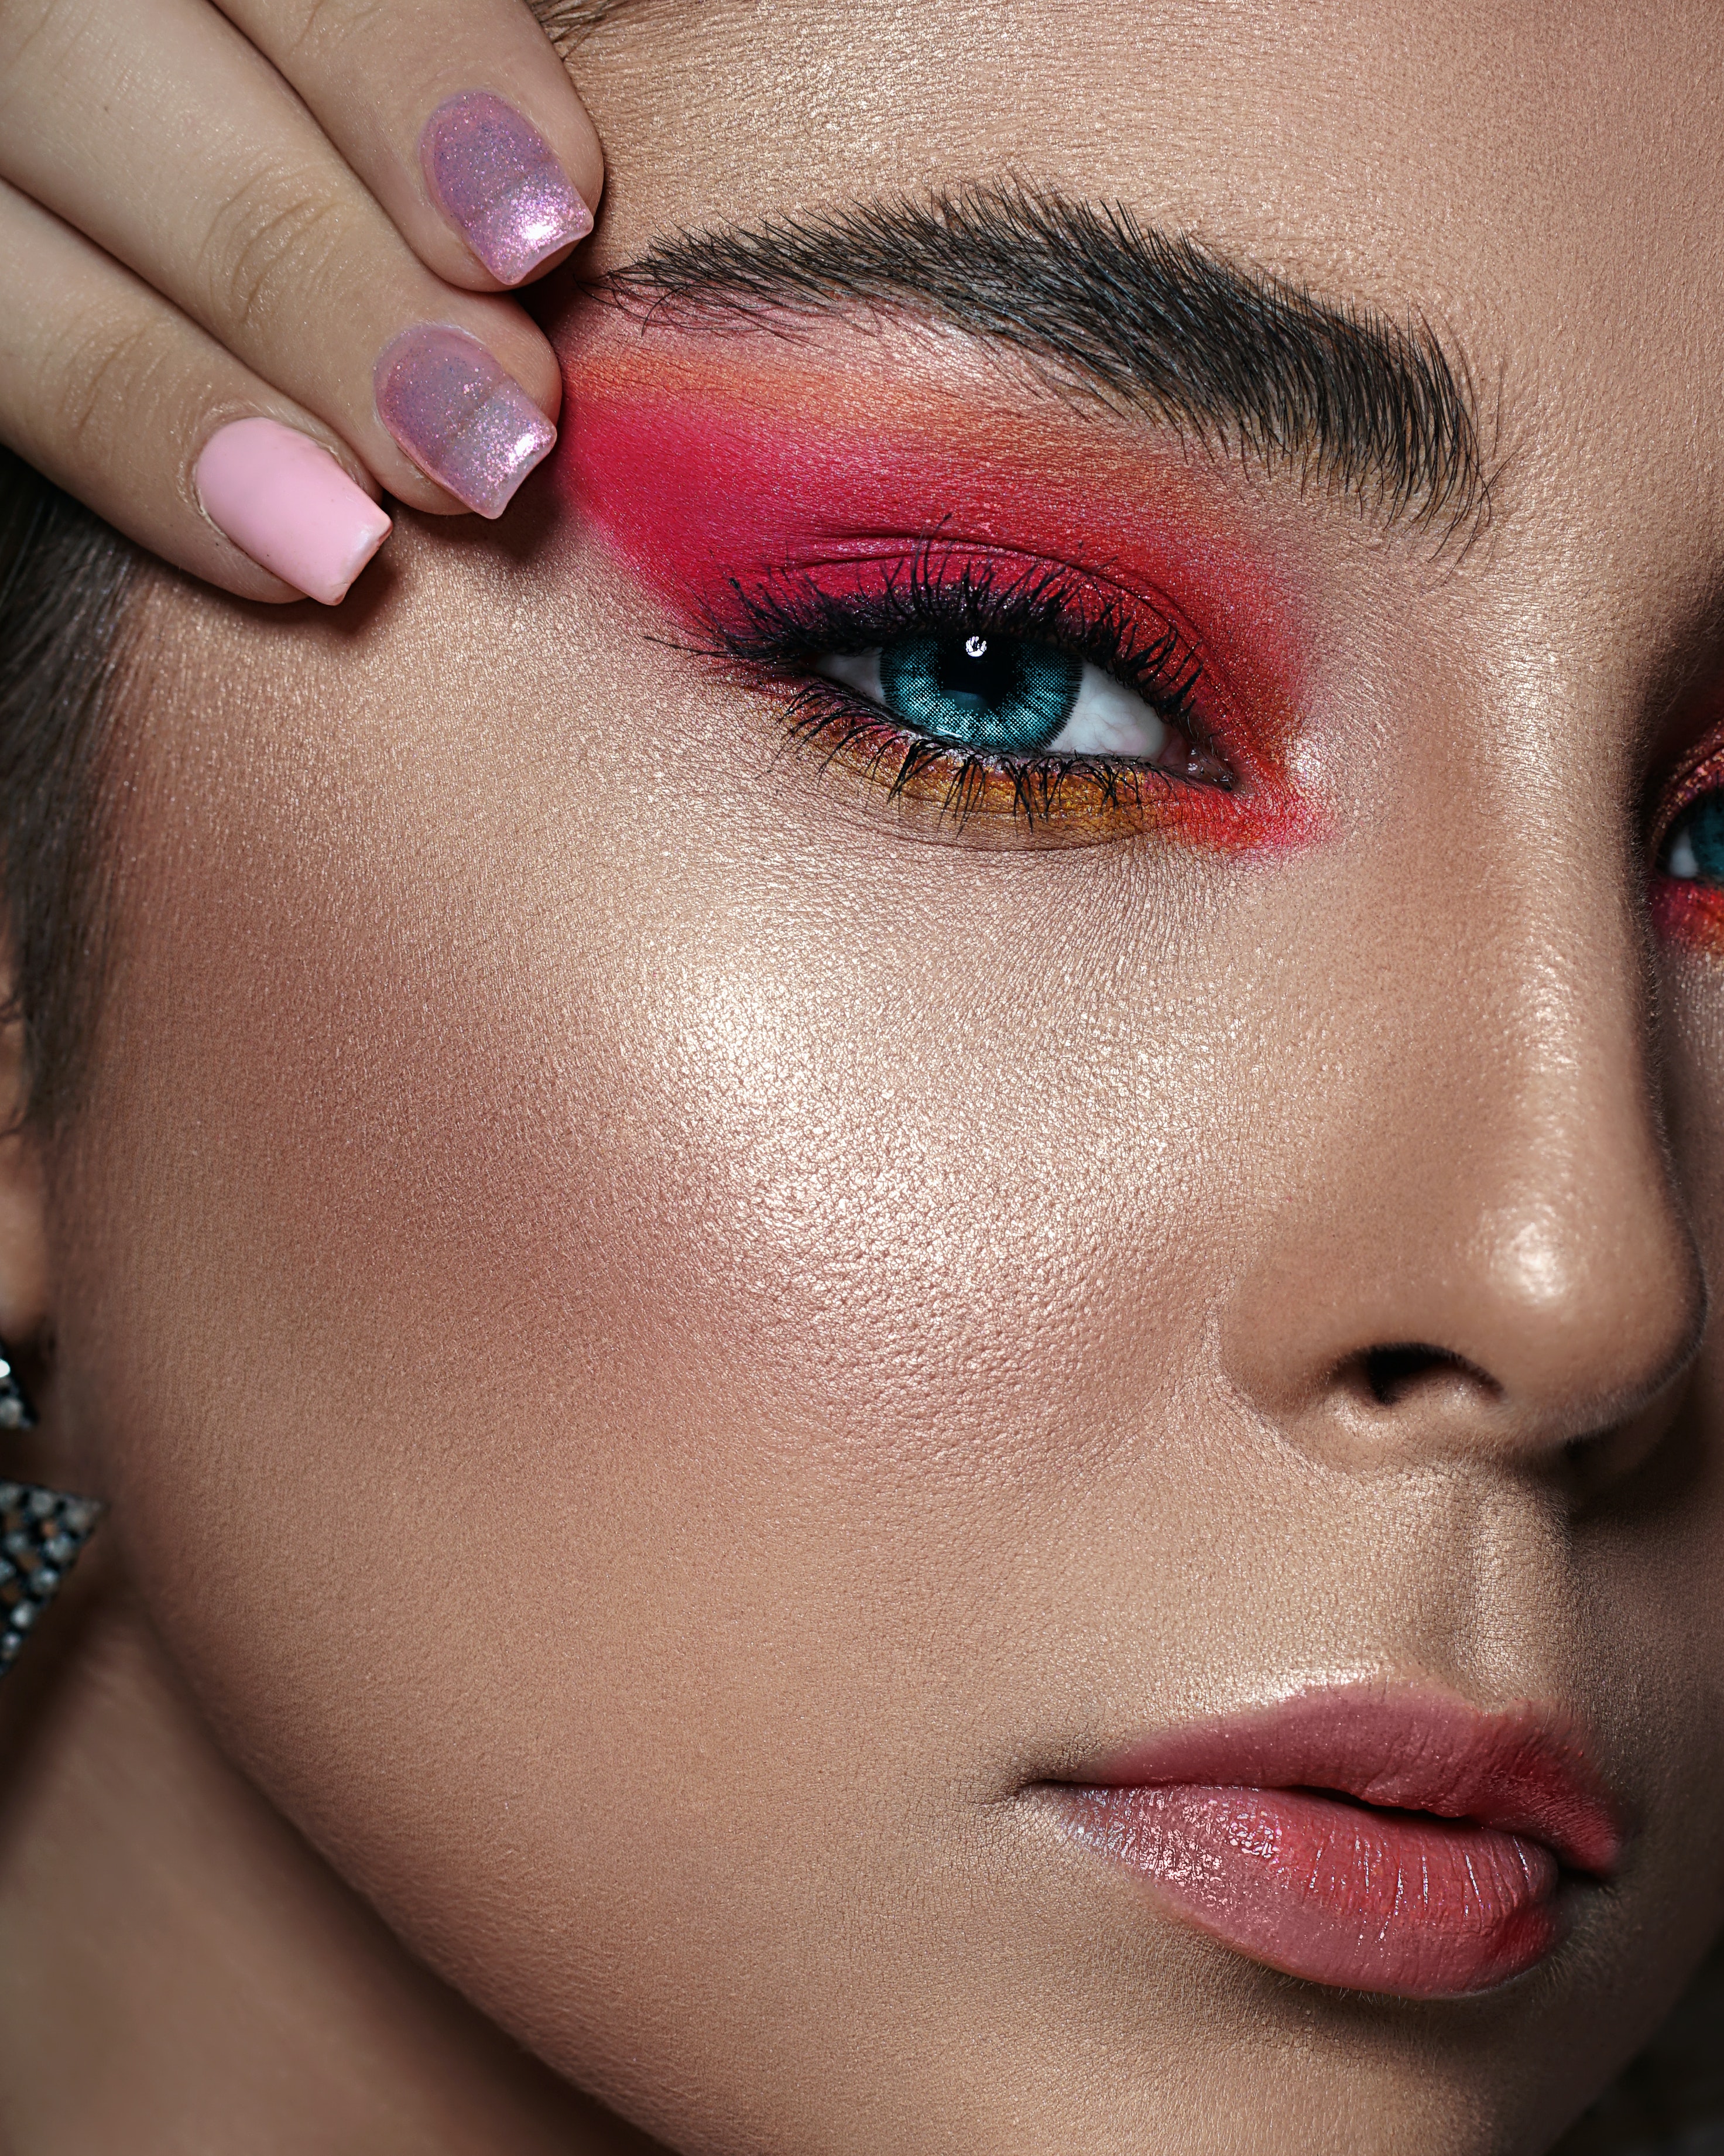 close-up-photo-of-woman-with-pink-eyeshadow-3912572.jpg